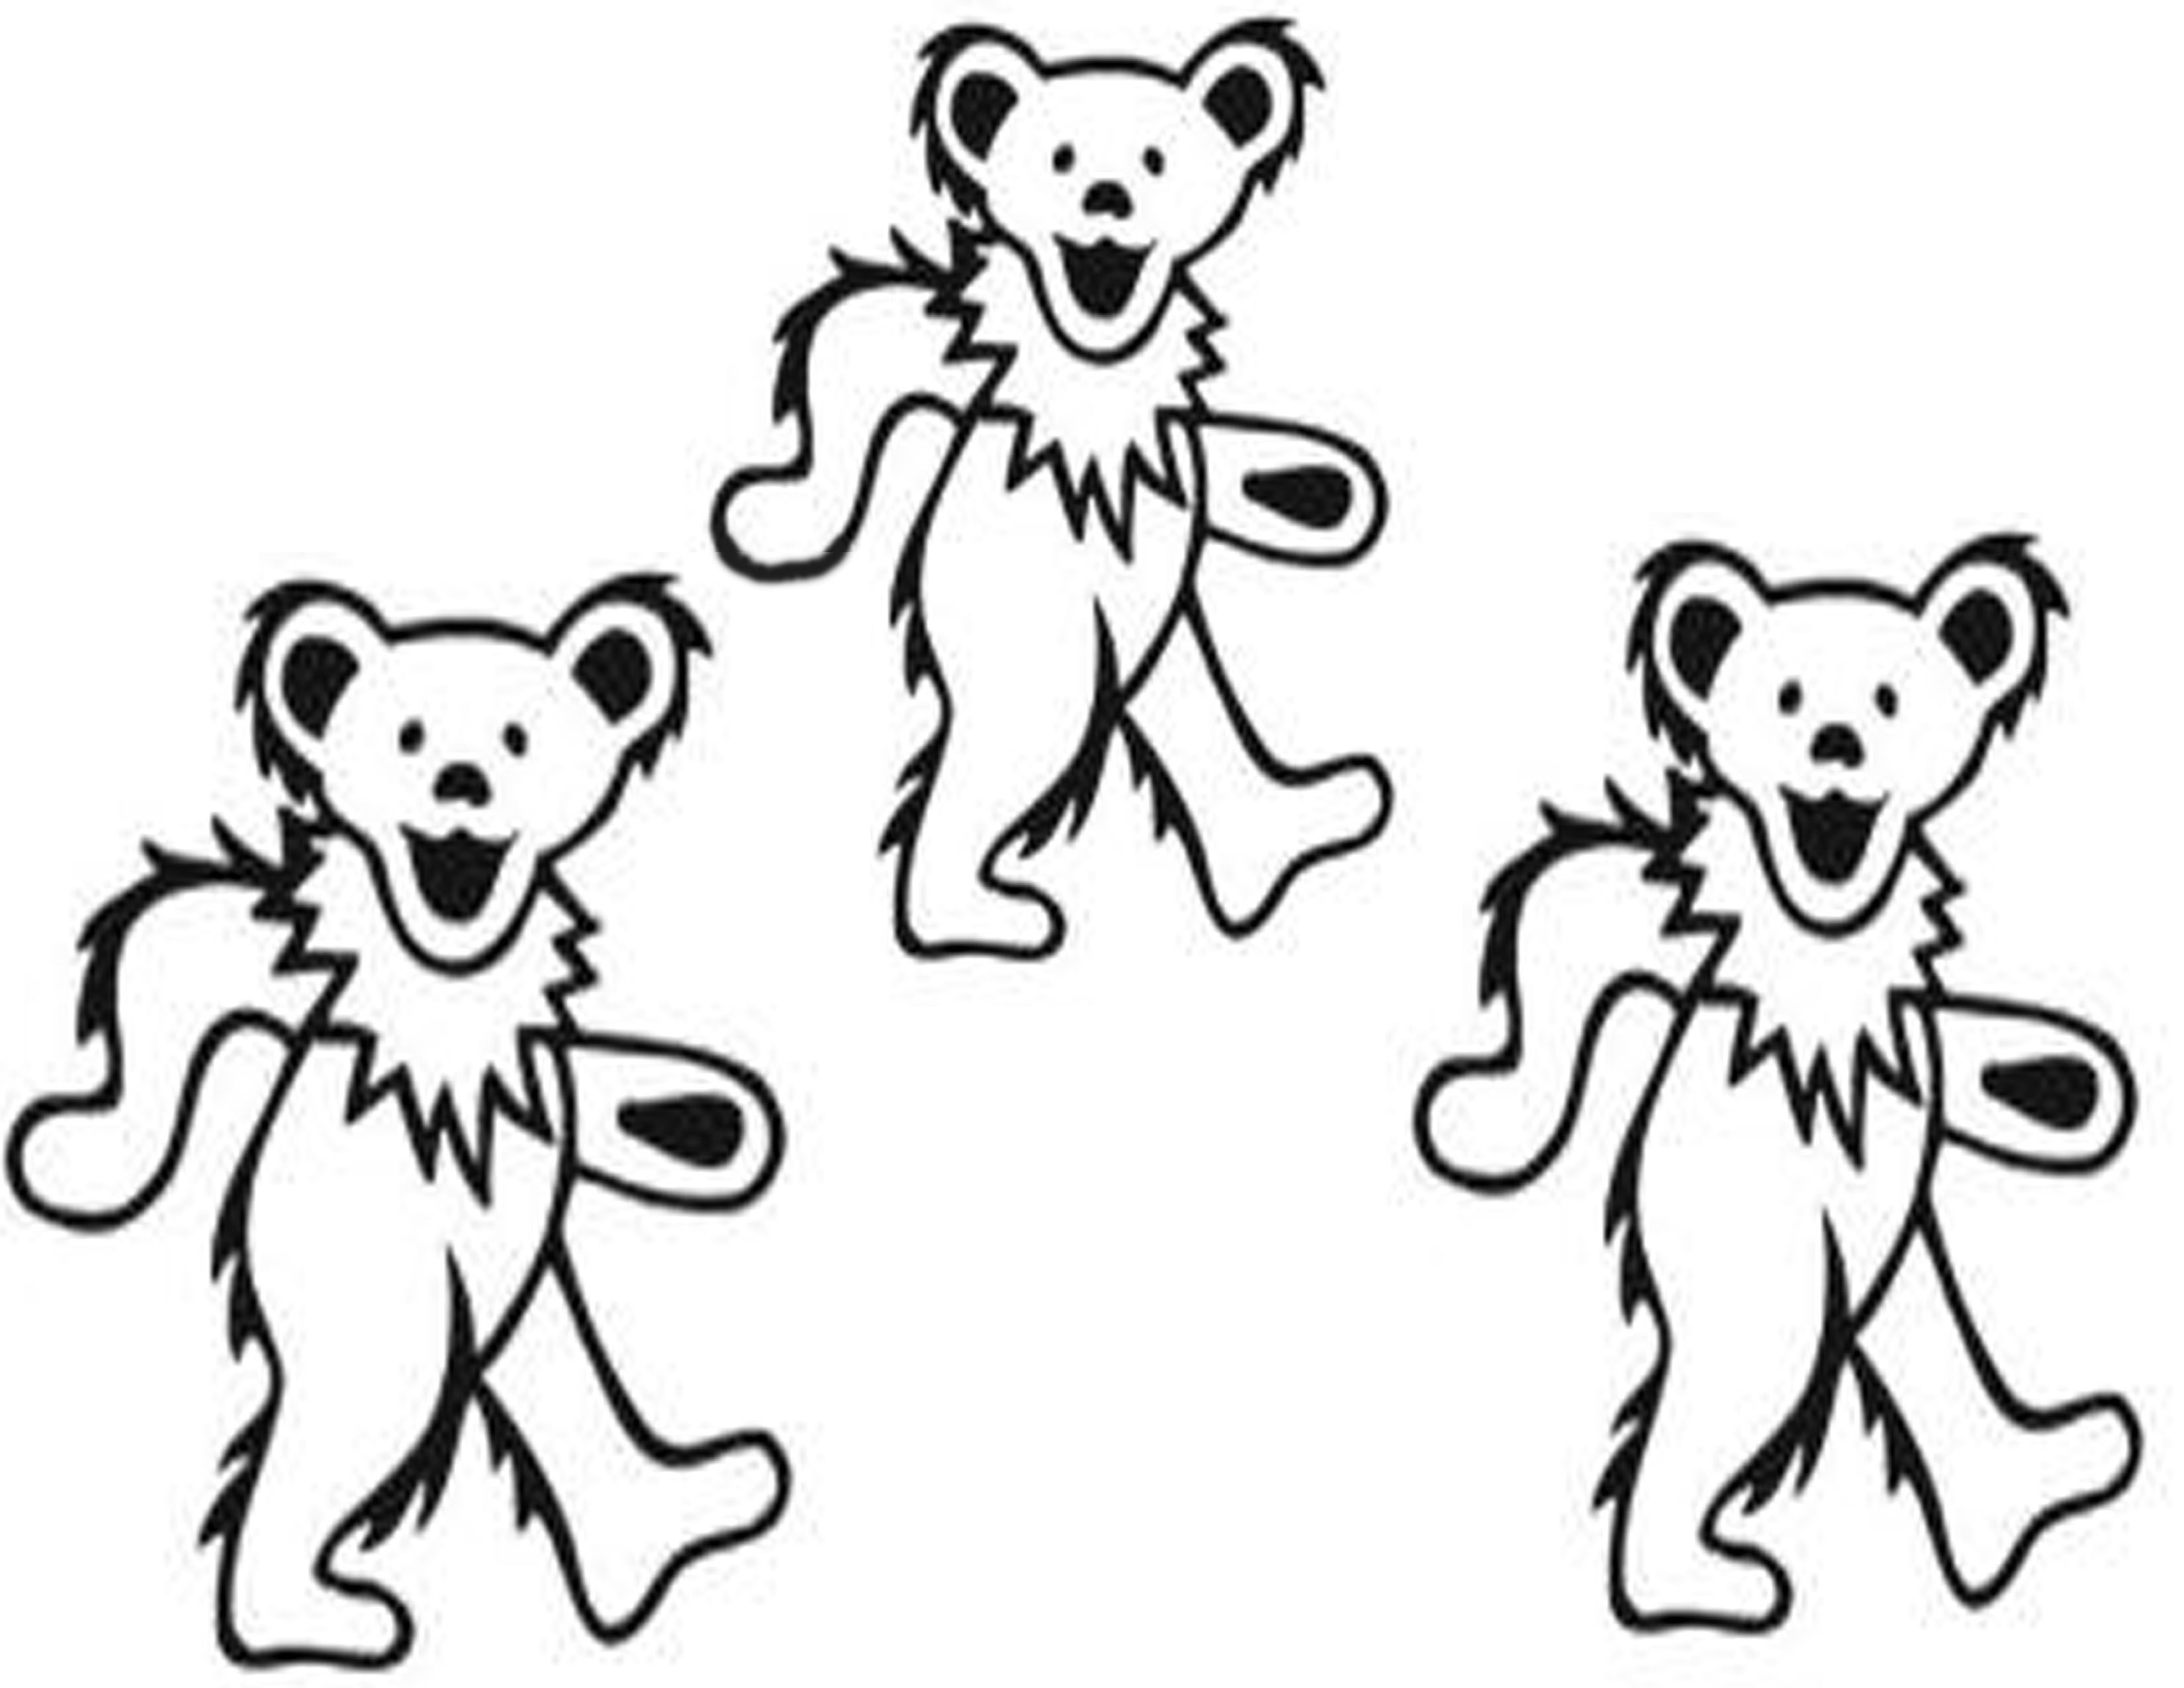 Free Grateful Dead Coloring Pages, Download Free Clip Art